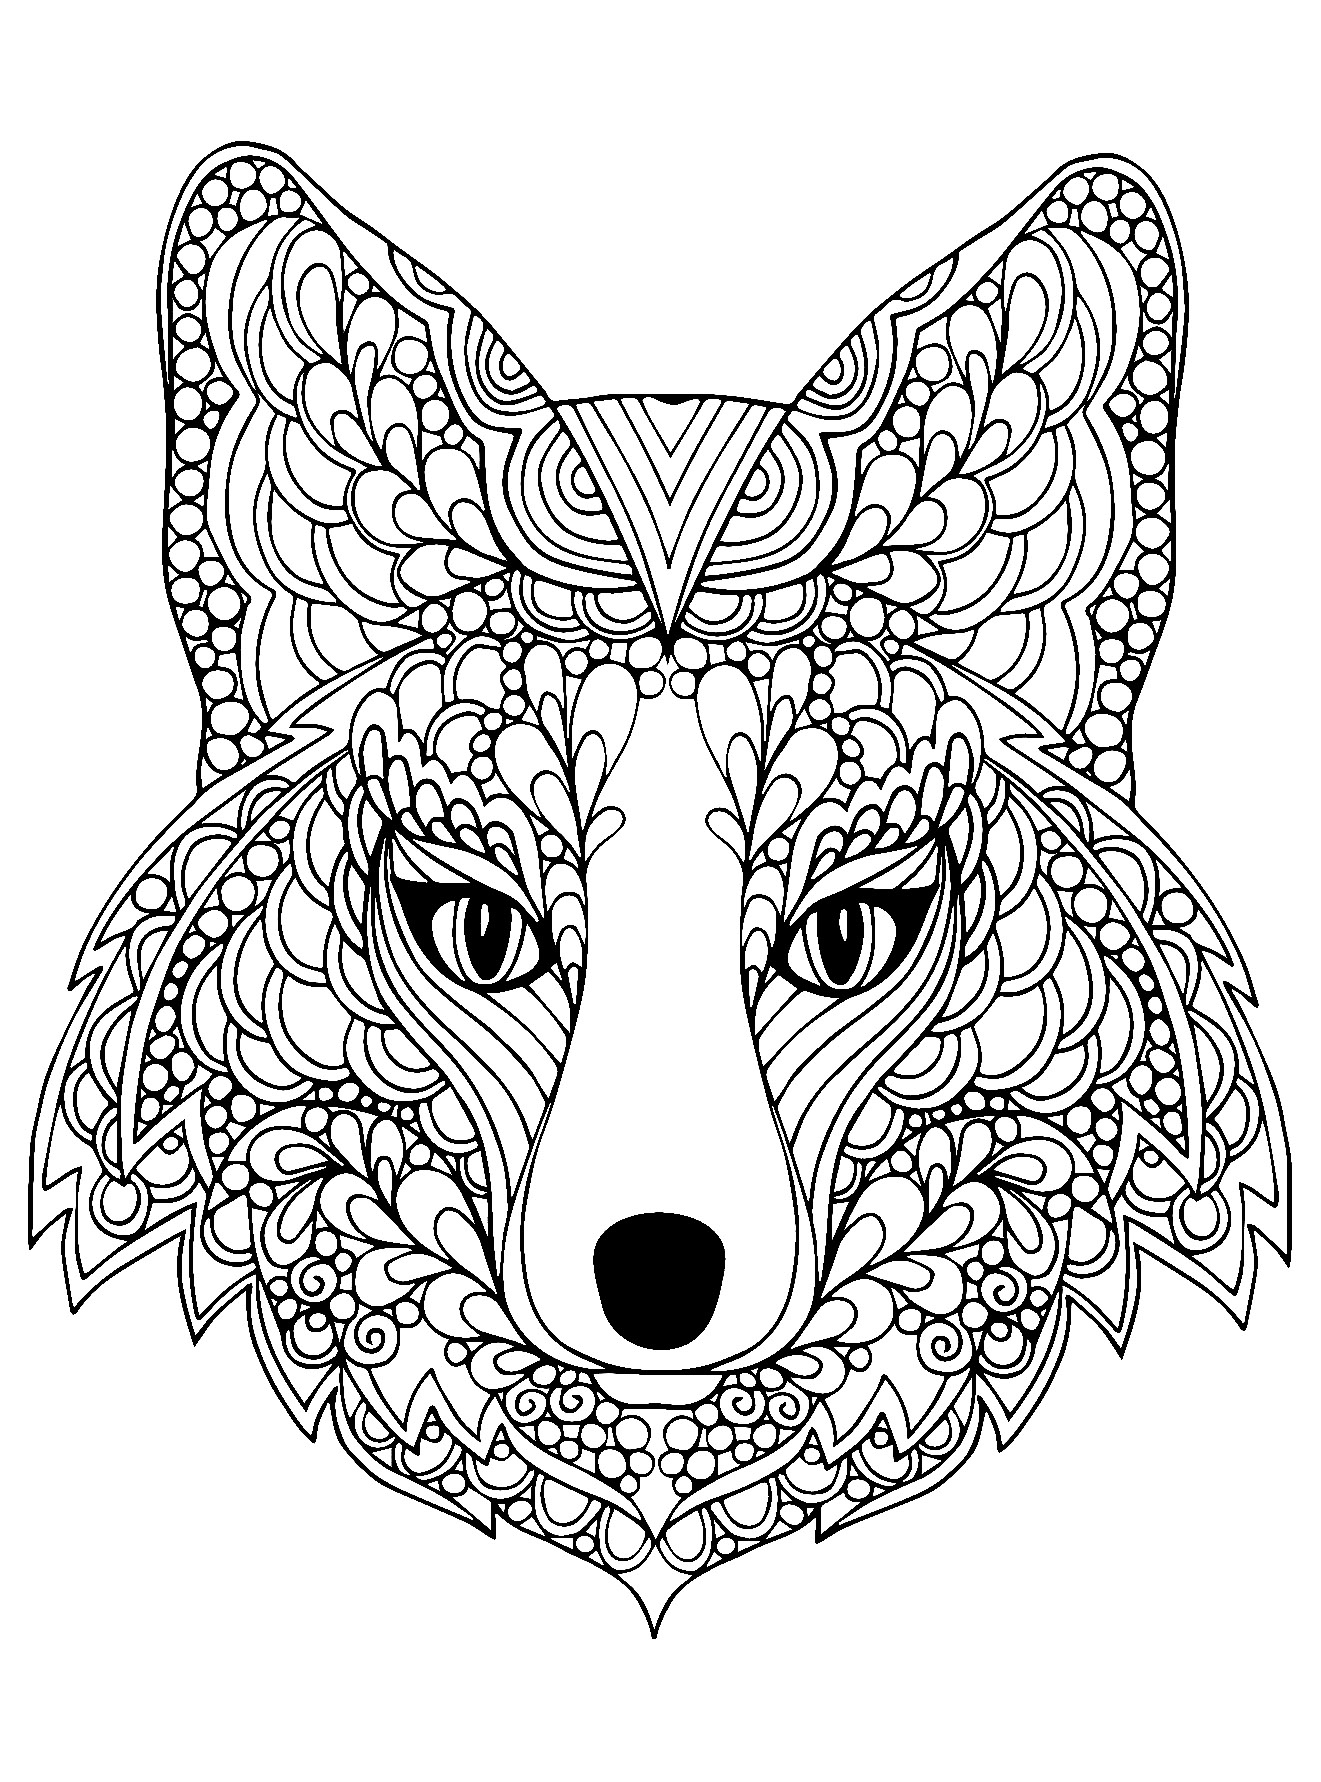 Fox coloring page to print and color